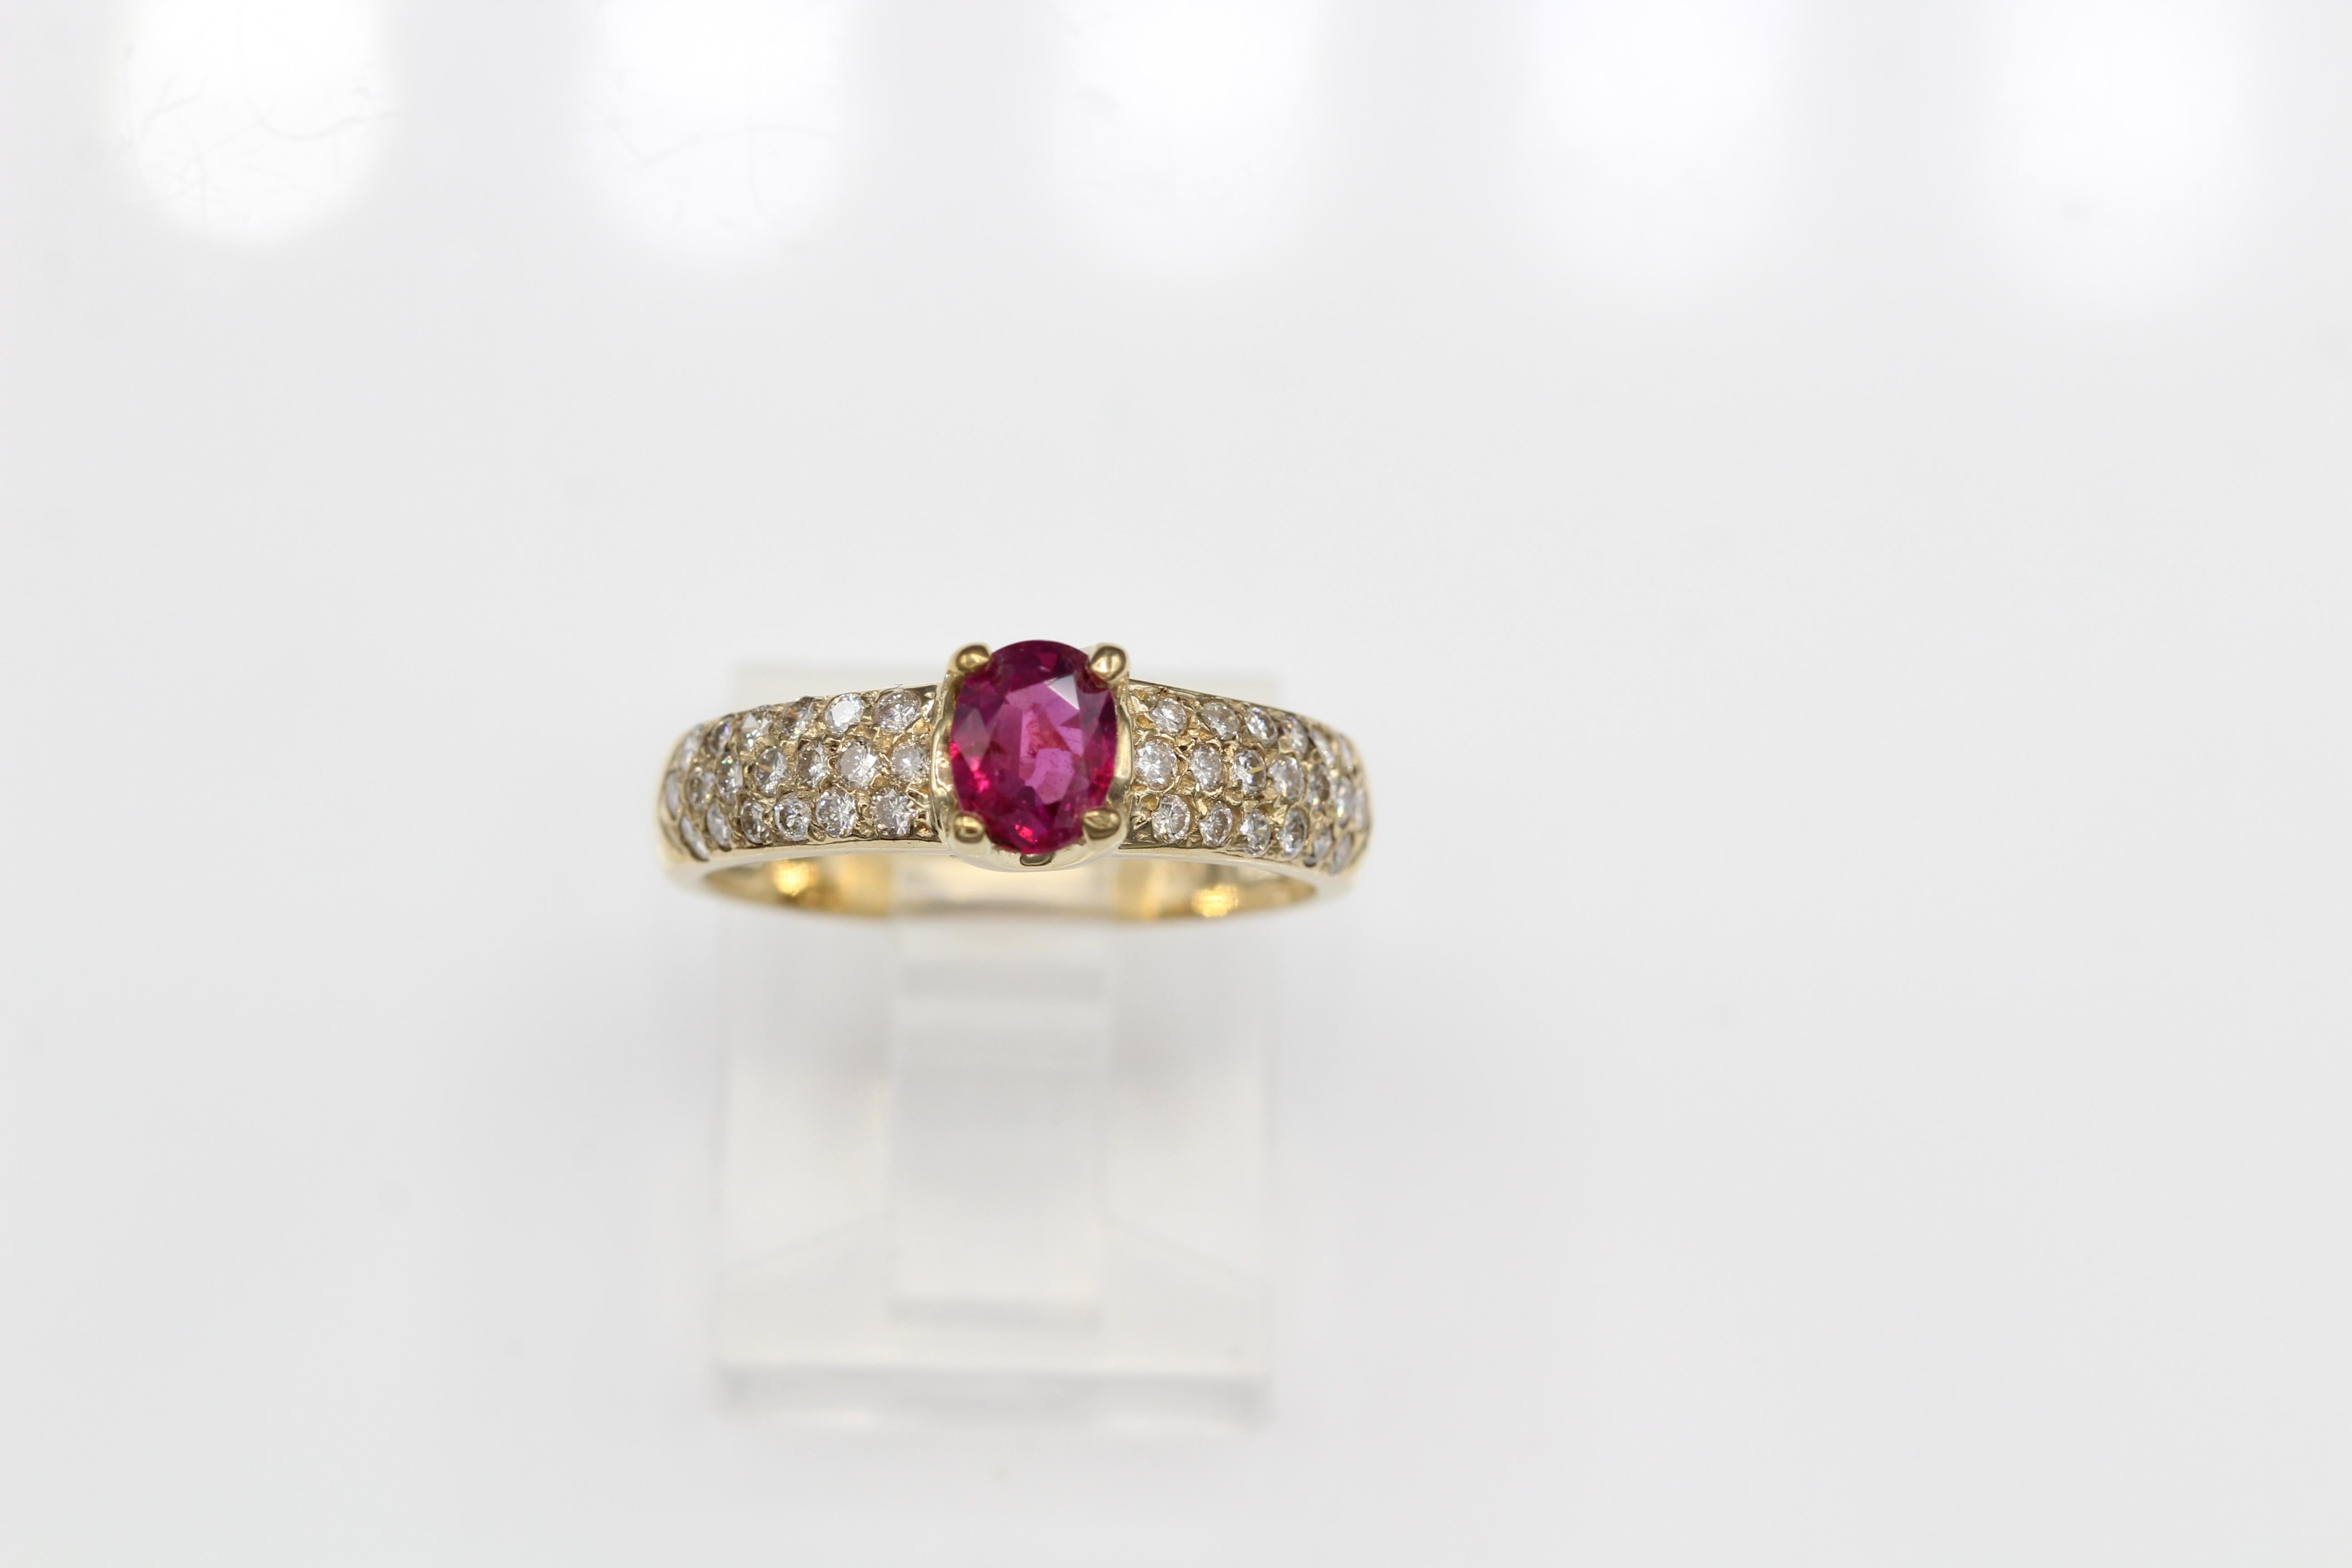 Classic Ruby Ring-Ruby is 0.65 carat Diamond 0.50 carat GH-VS.
14K Yellow Gold 2.70 Grams, Finger Size 6.5
All natural stones